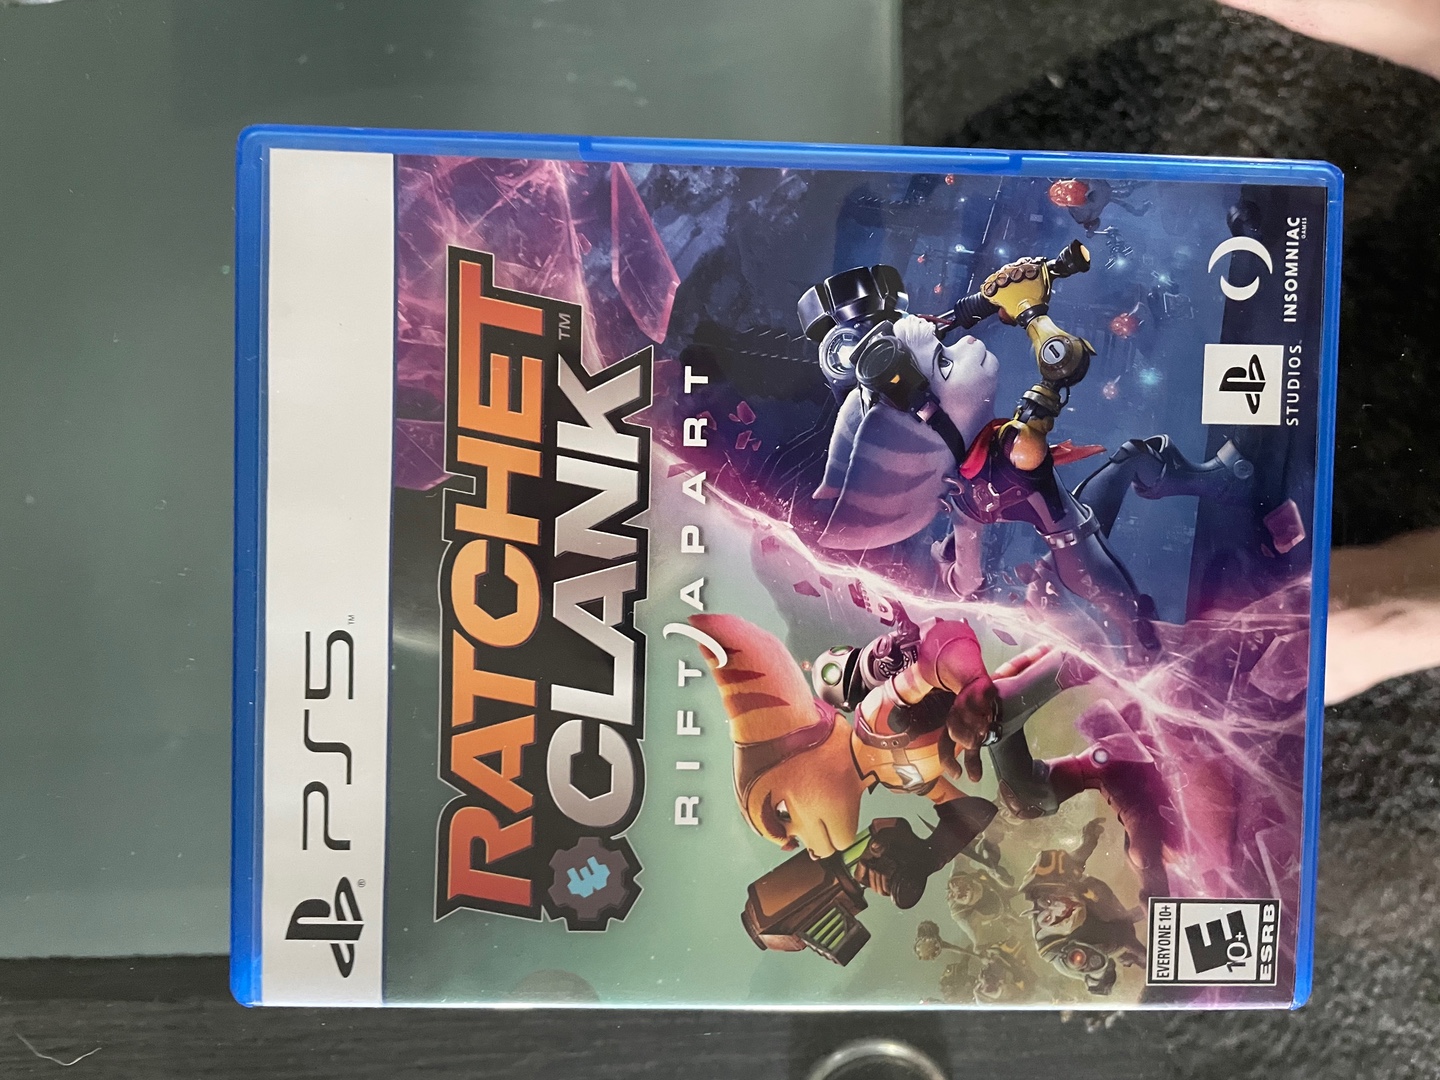 Ratchet & Clank Ps5 - PlayStation 5